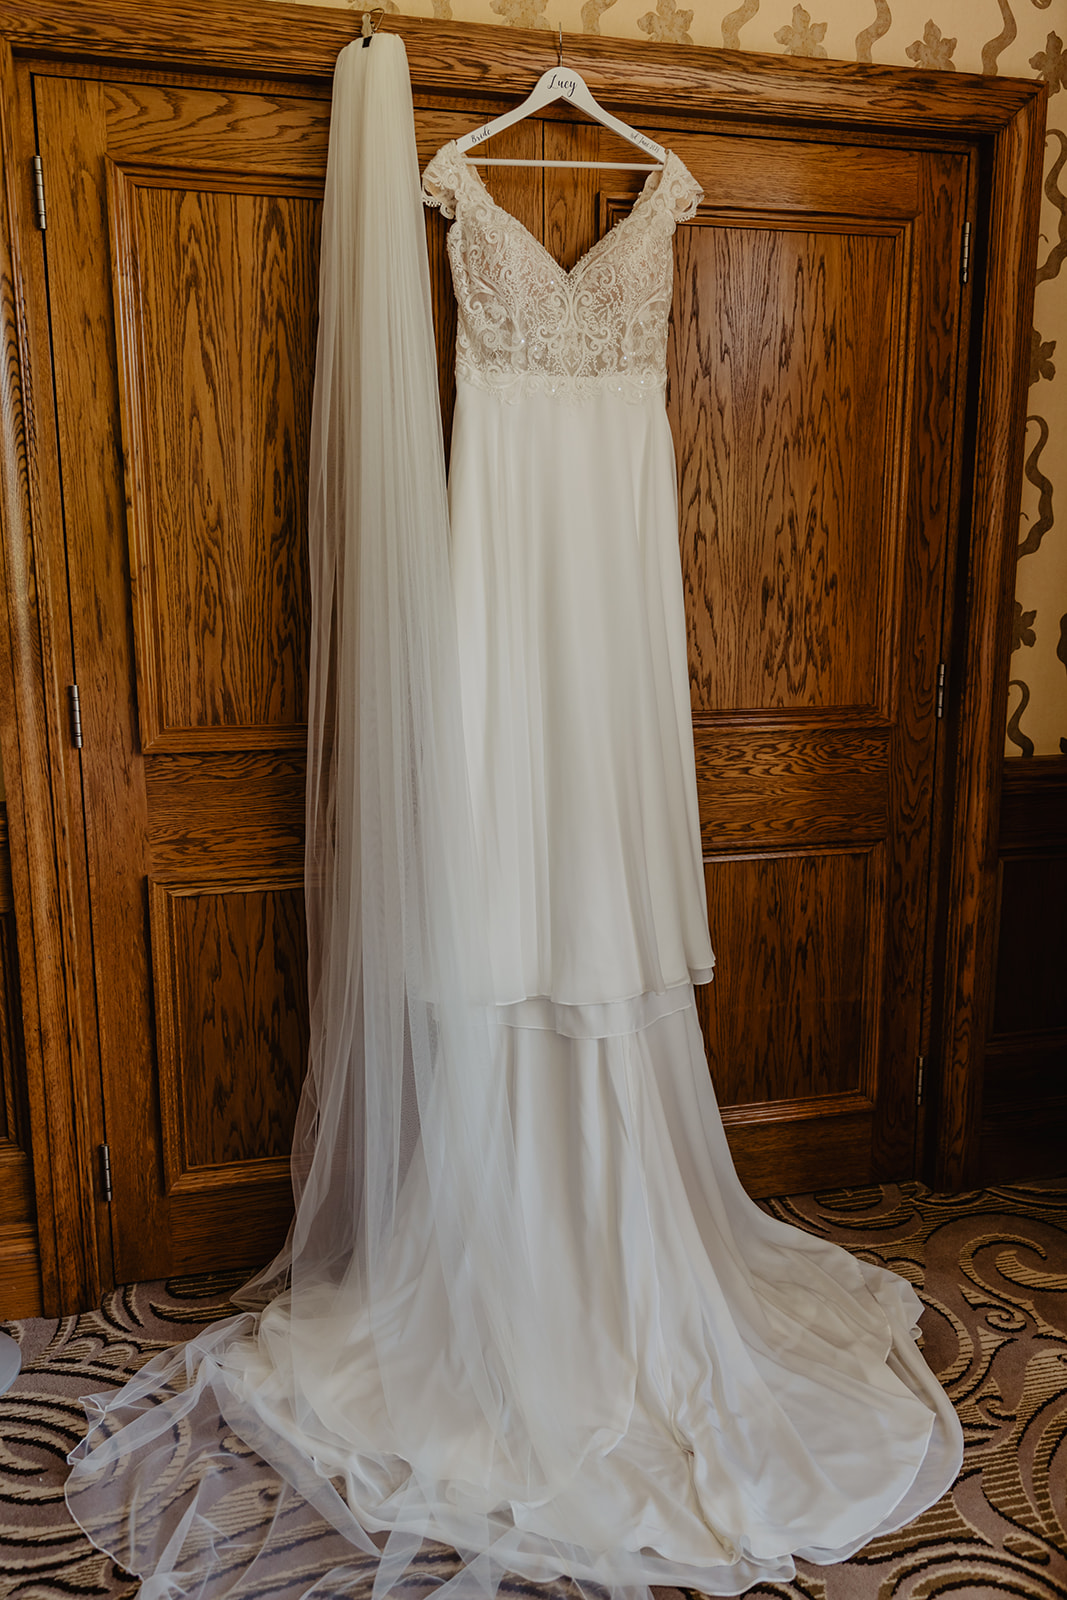 Bride's dress hanging up at a South Lodge, Sussex Wedding. By Olive Joy Photography